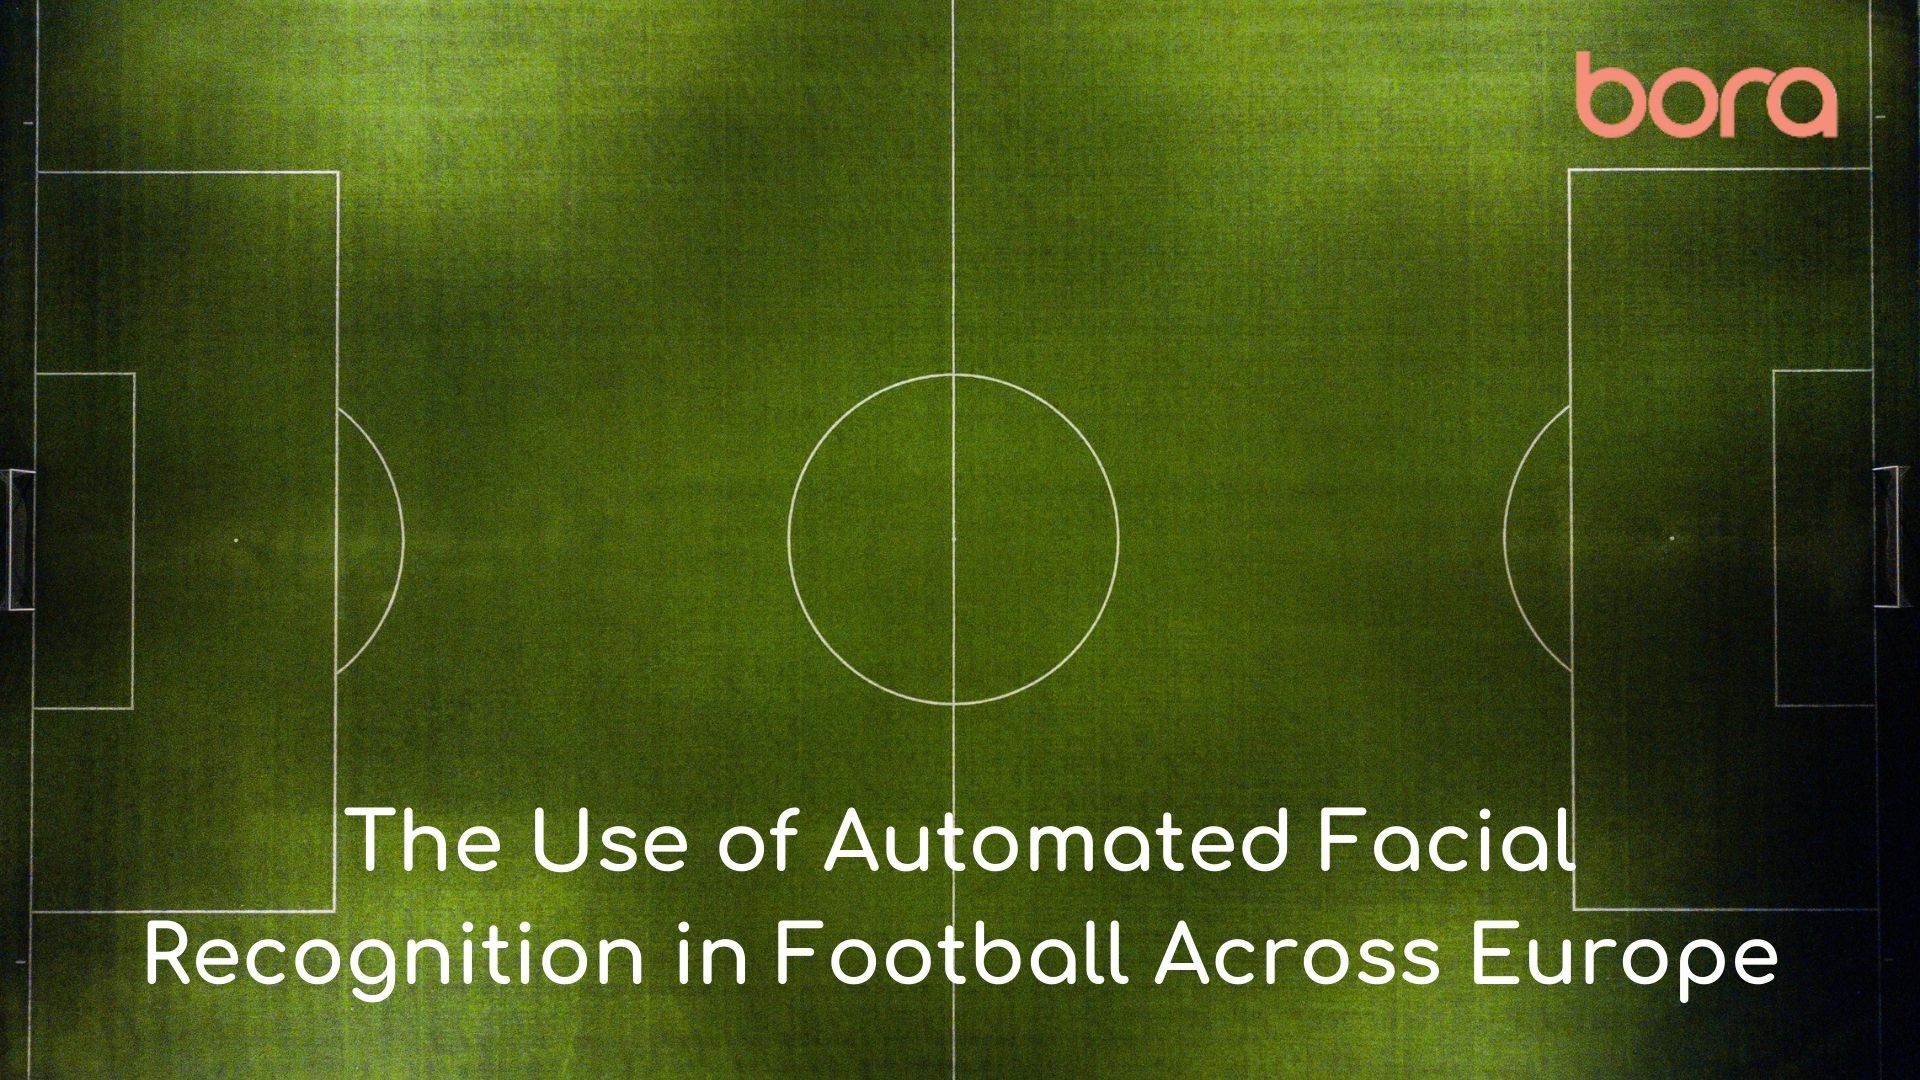 The Use of Automated Facial Recognition in Football Across Europe